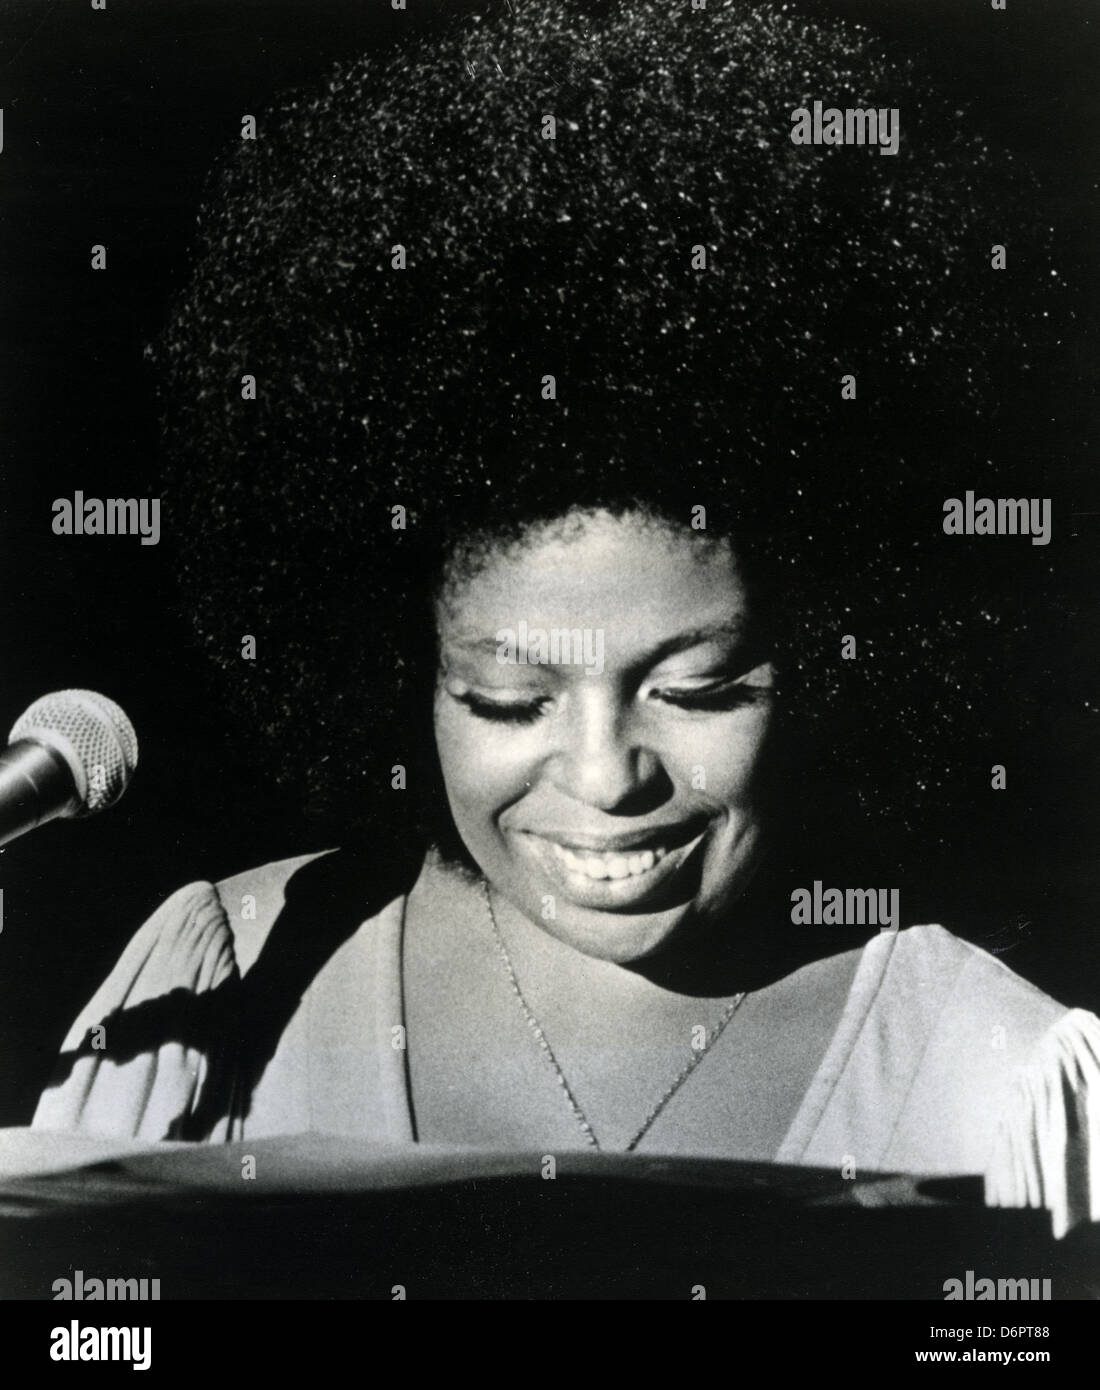 ROBERTA FLACK  Promotional photo of US singer and songwriter  about 1975 Stock Photo